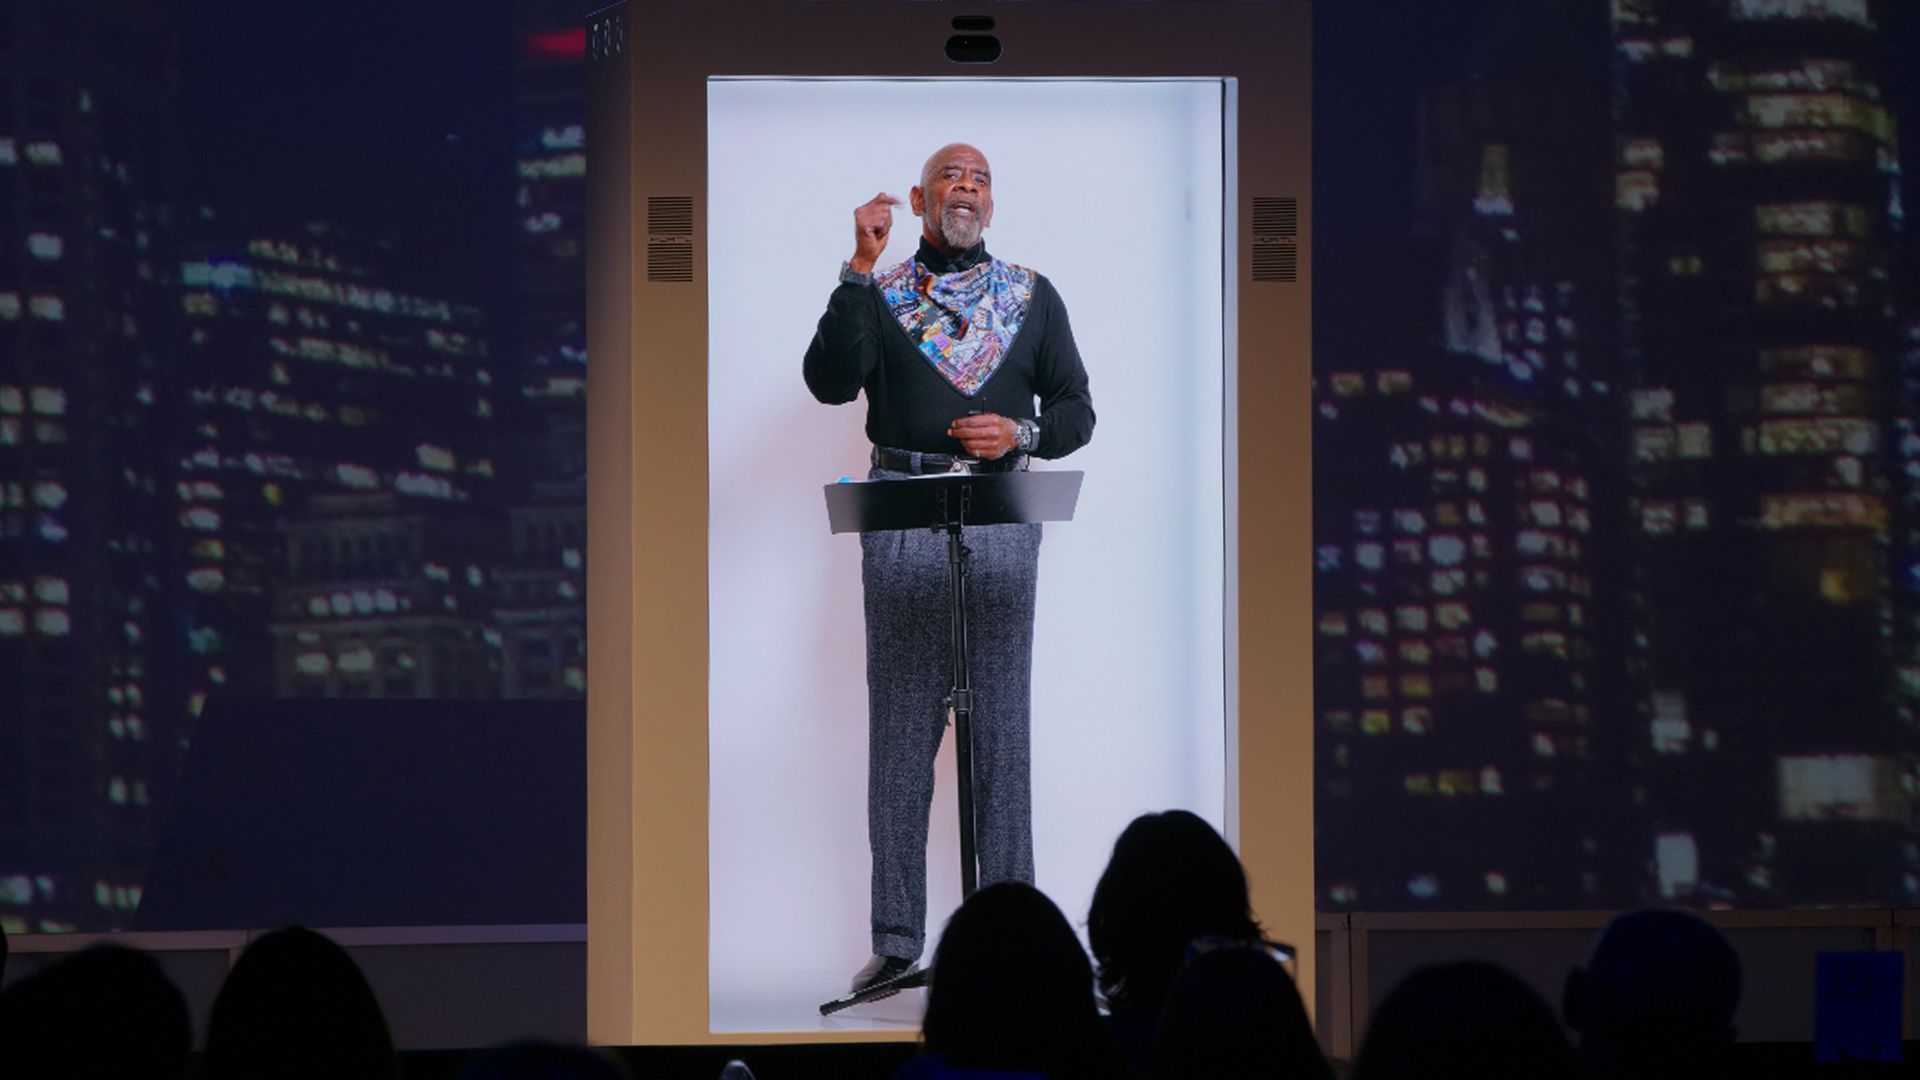 Chris Gardner, author of the memoir "The Pursuit of Happyness," appears in a PORTL booth as a motivational speaker.